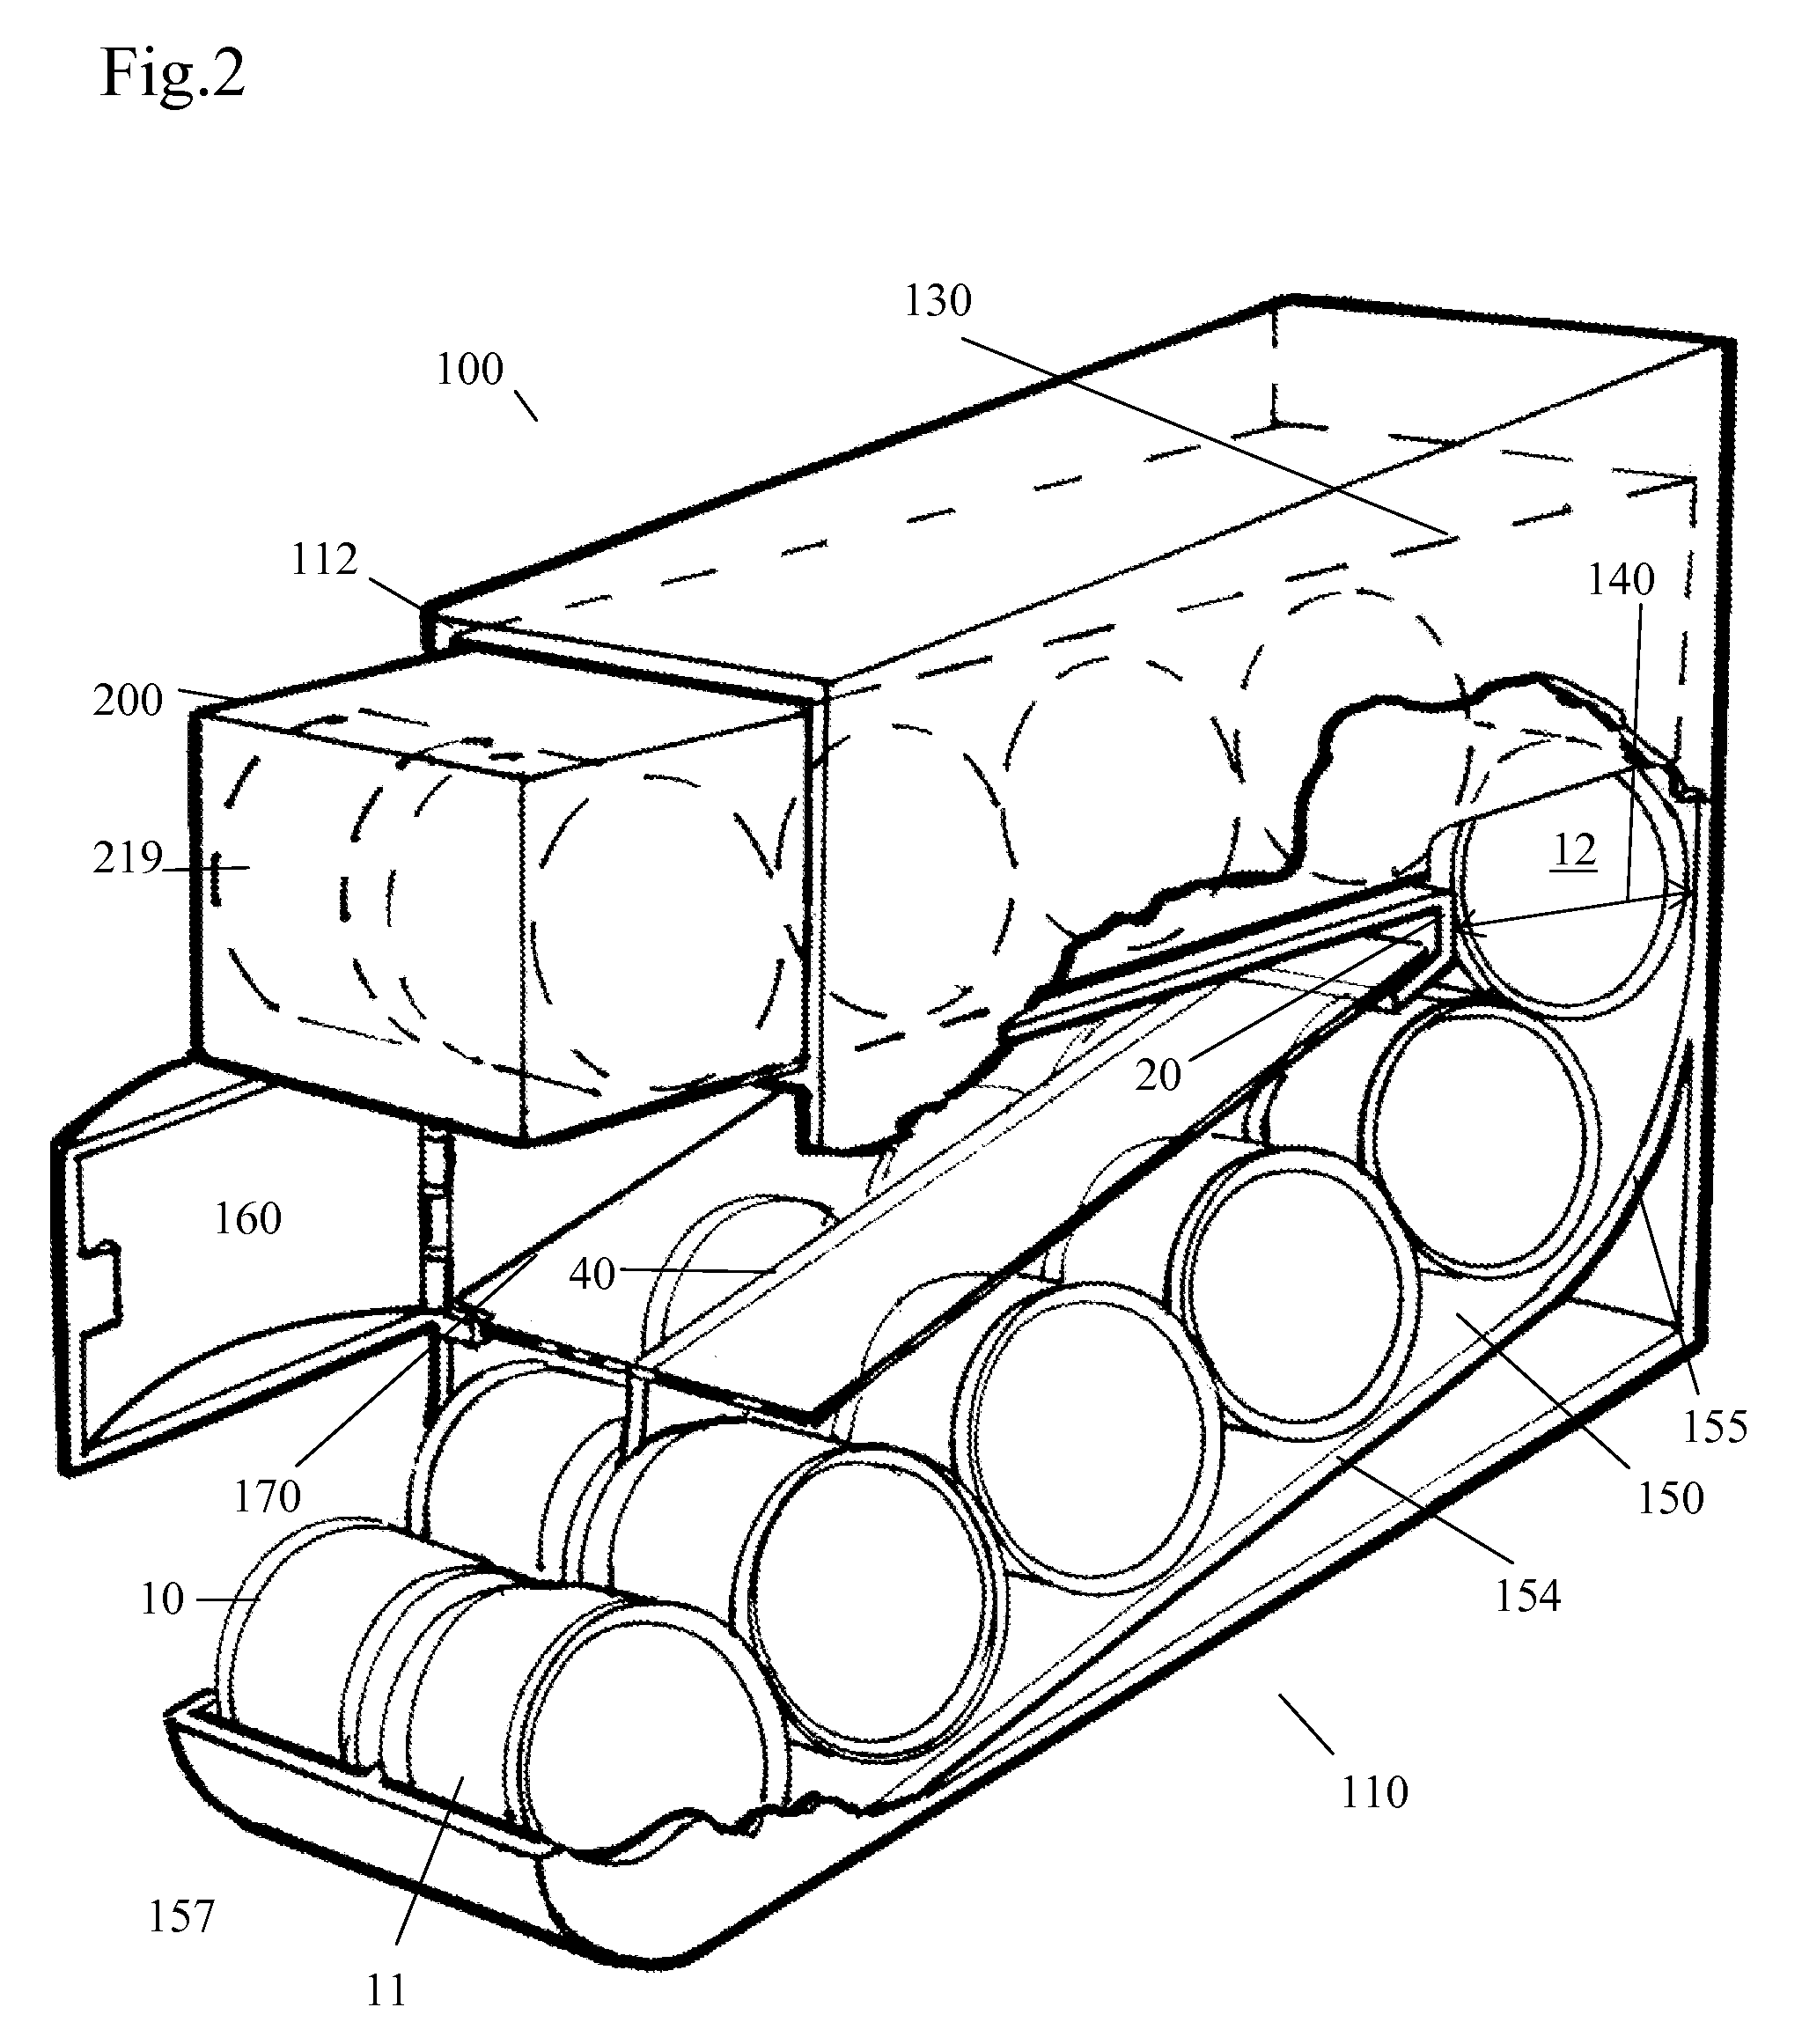 Product dispenser assembly and cartridge for holding product